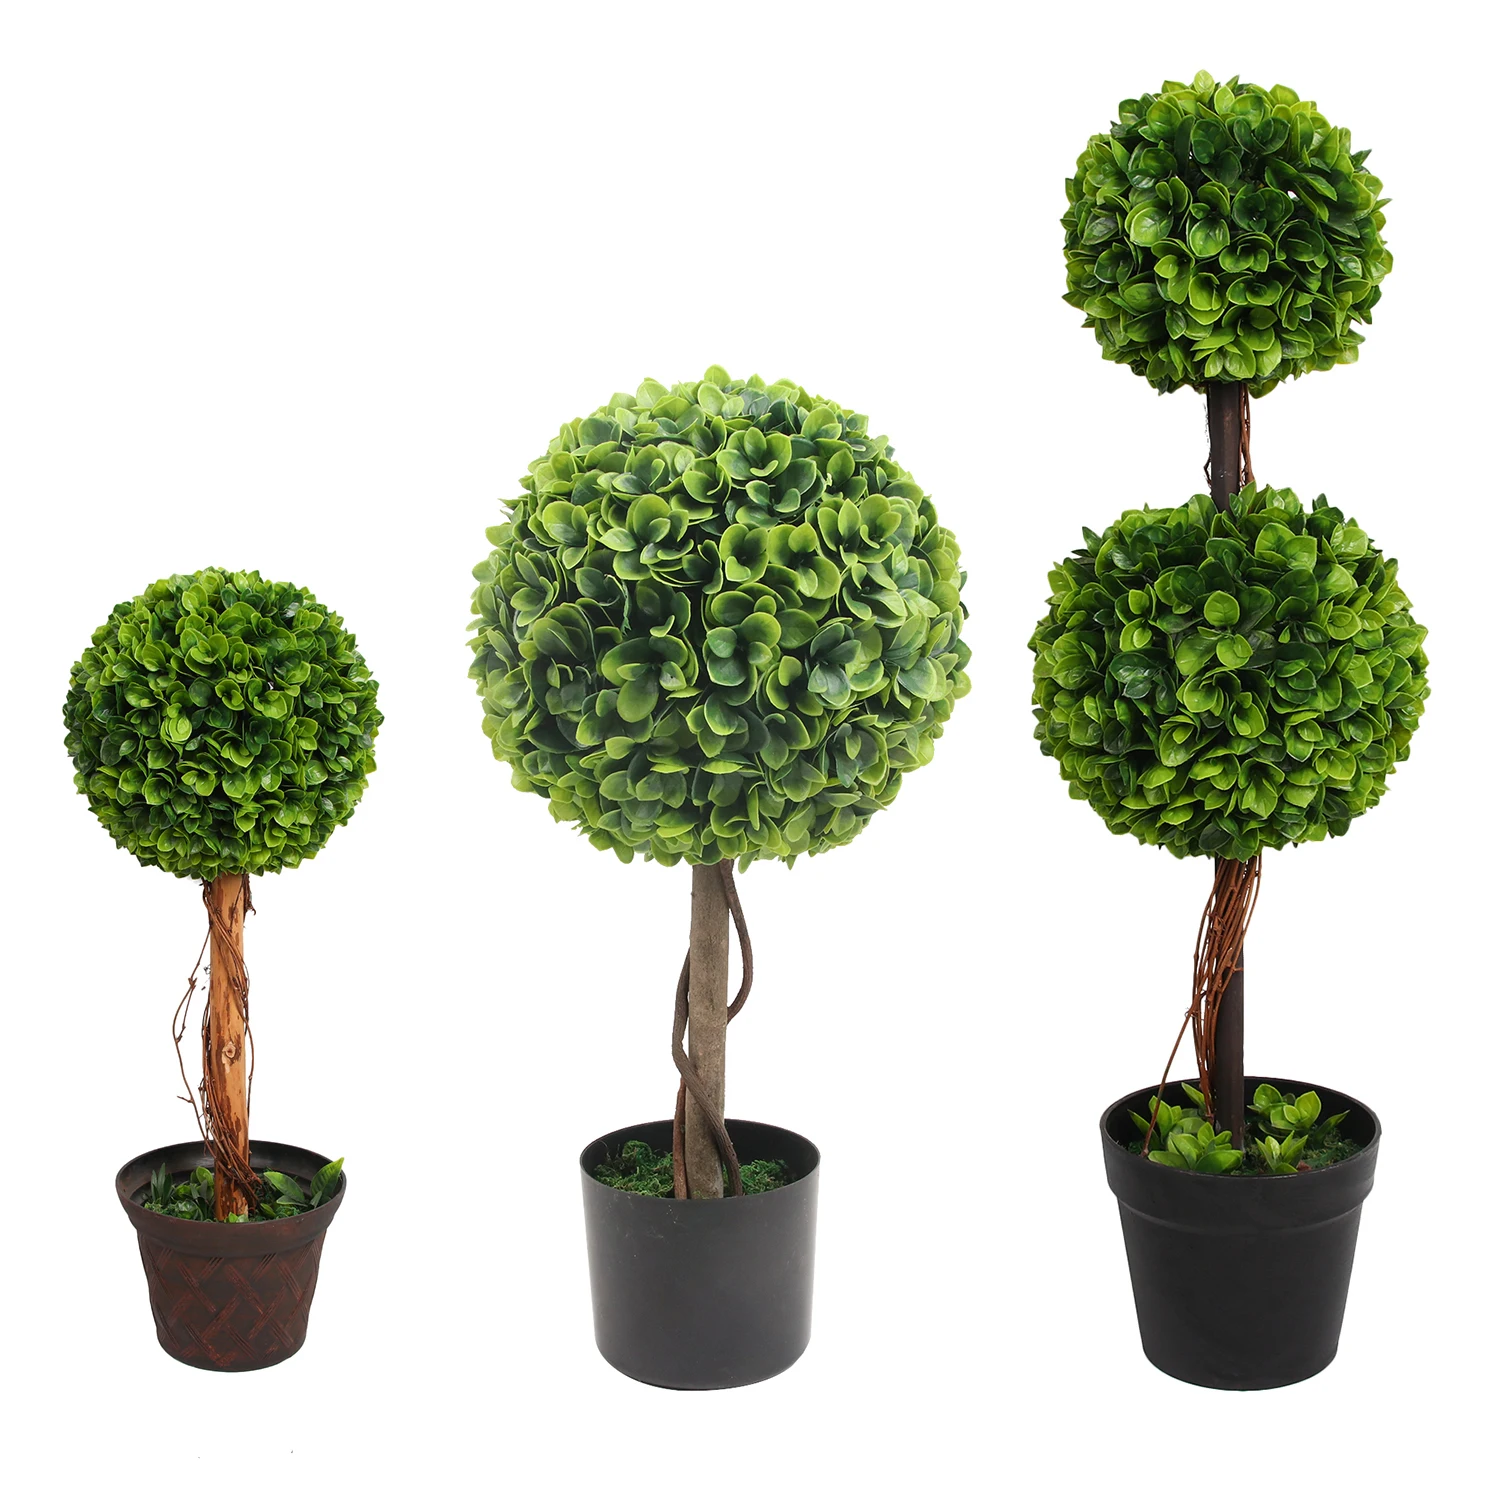 

Factory price greenery boxwood grass ball artificial topiary bonsai tree for indoor outdoor decor, Green